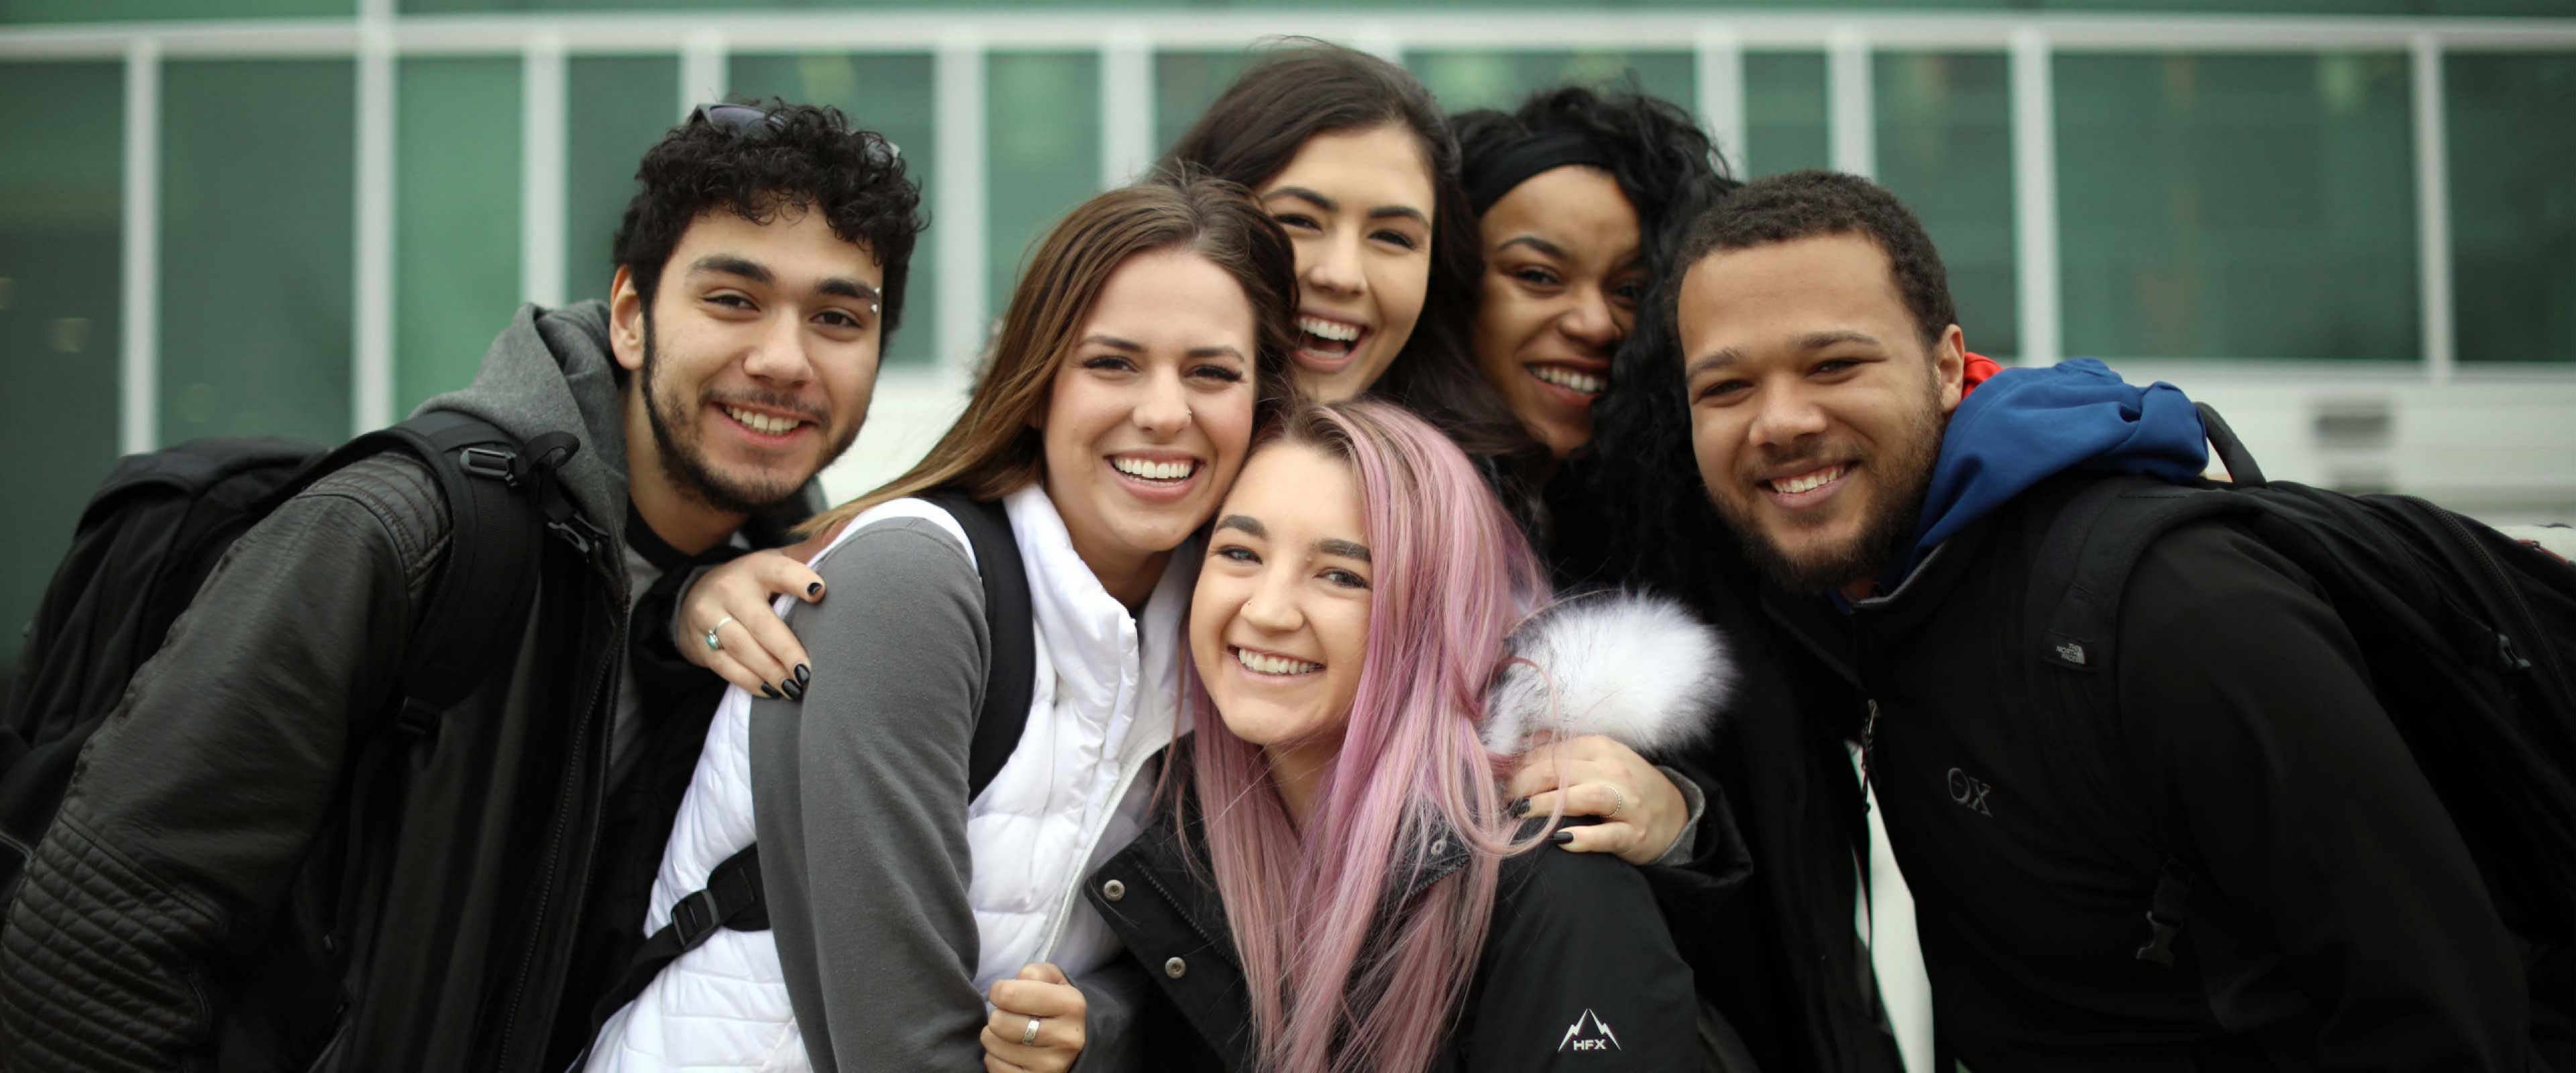 WMU students smile and pose outdoors on campus